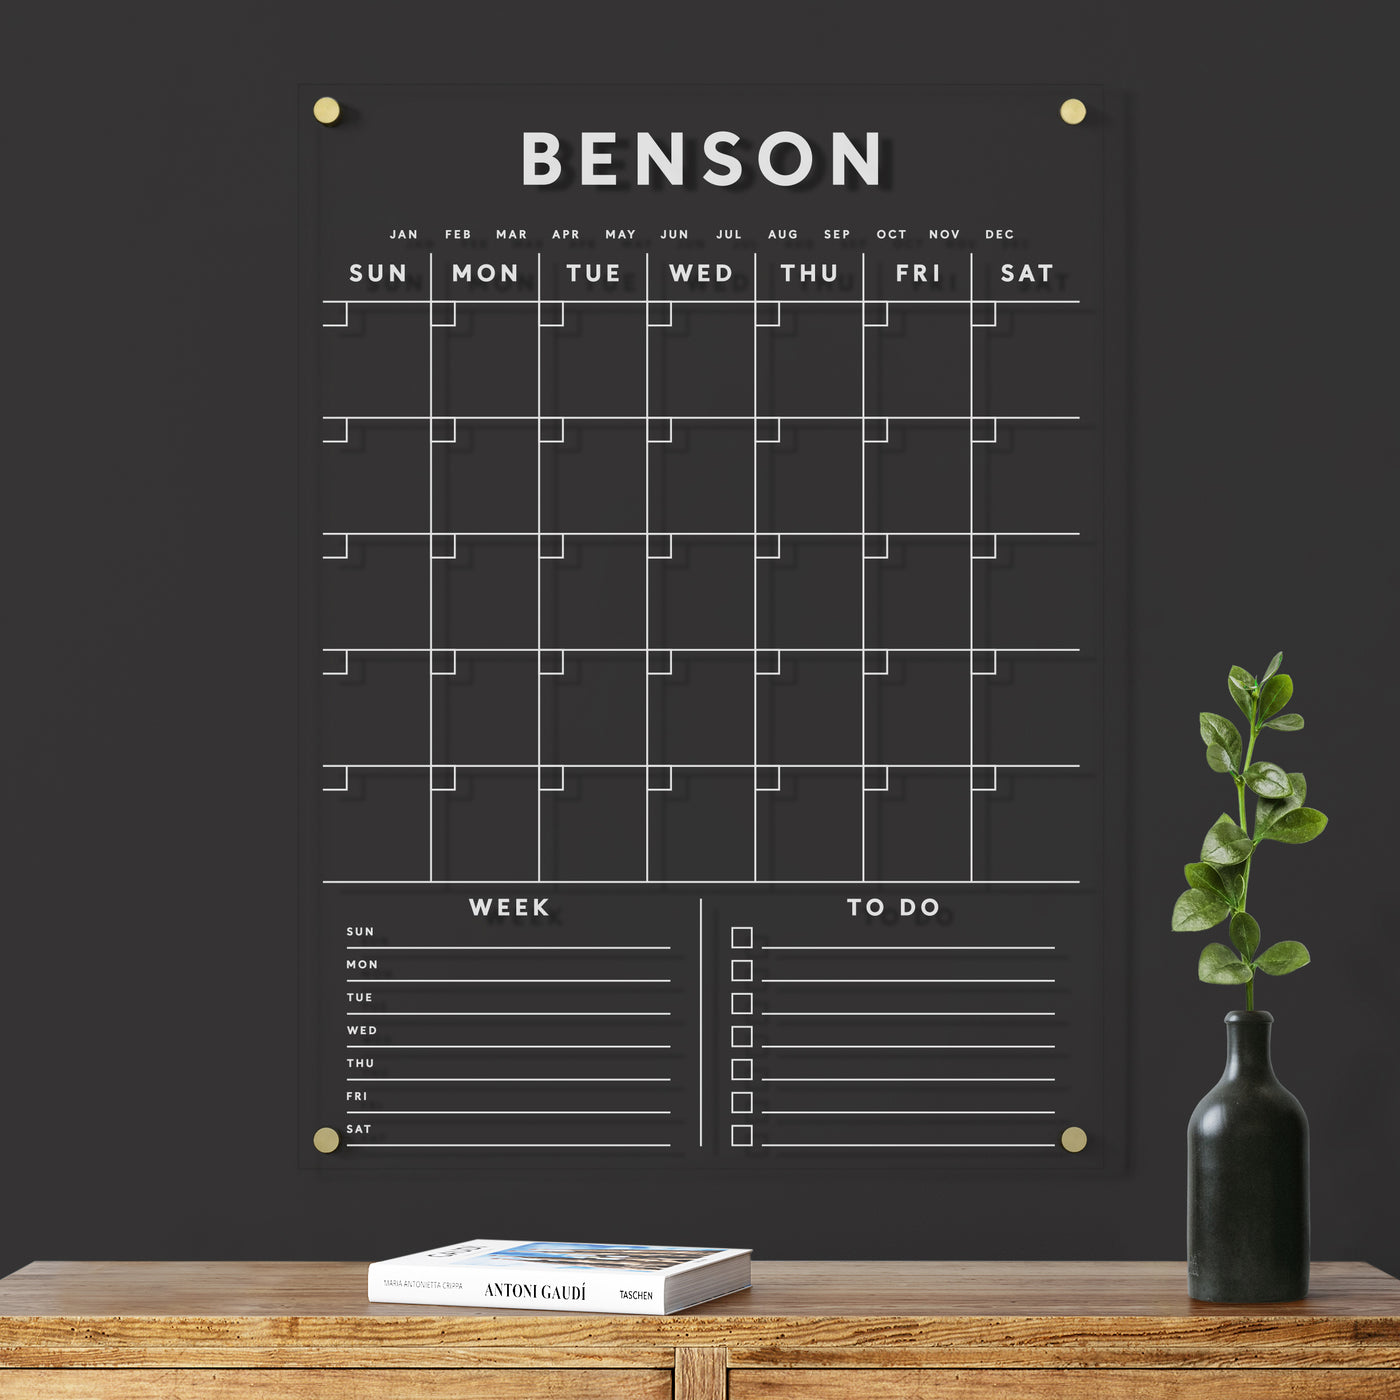 Acrylic Calendar with family name and bottom section - White text